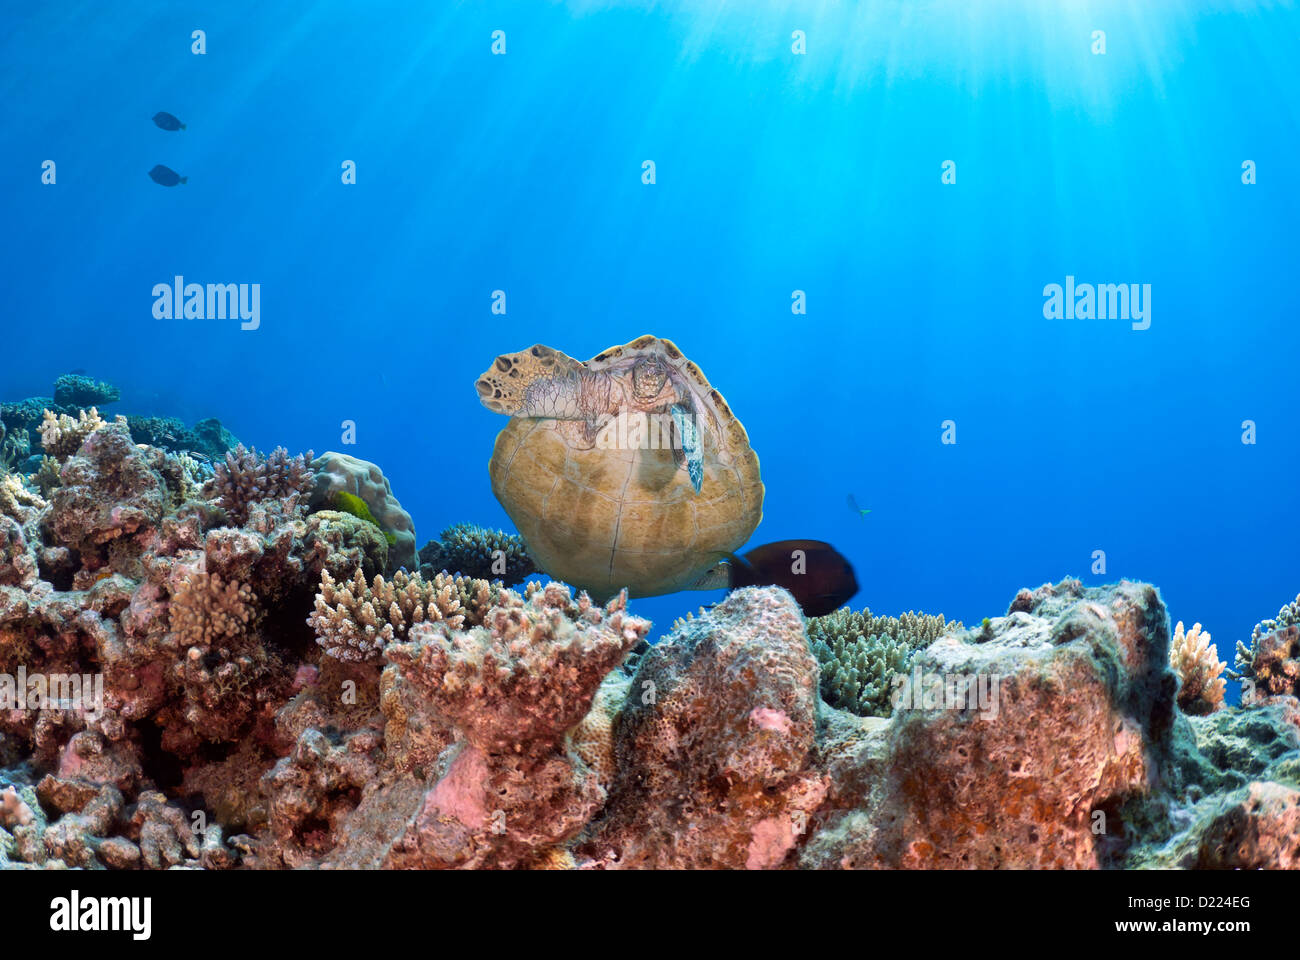 Green Sea Turtle Chelonia mydas is feeding on a Coral Reef, Coral Sea, Great Barrier Reef, Pacific Ocean, Queensland, Australia Stock Photo